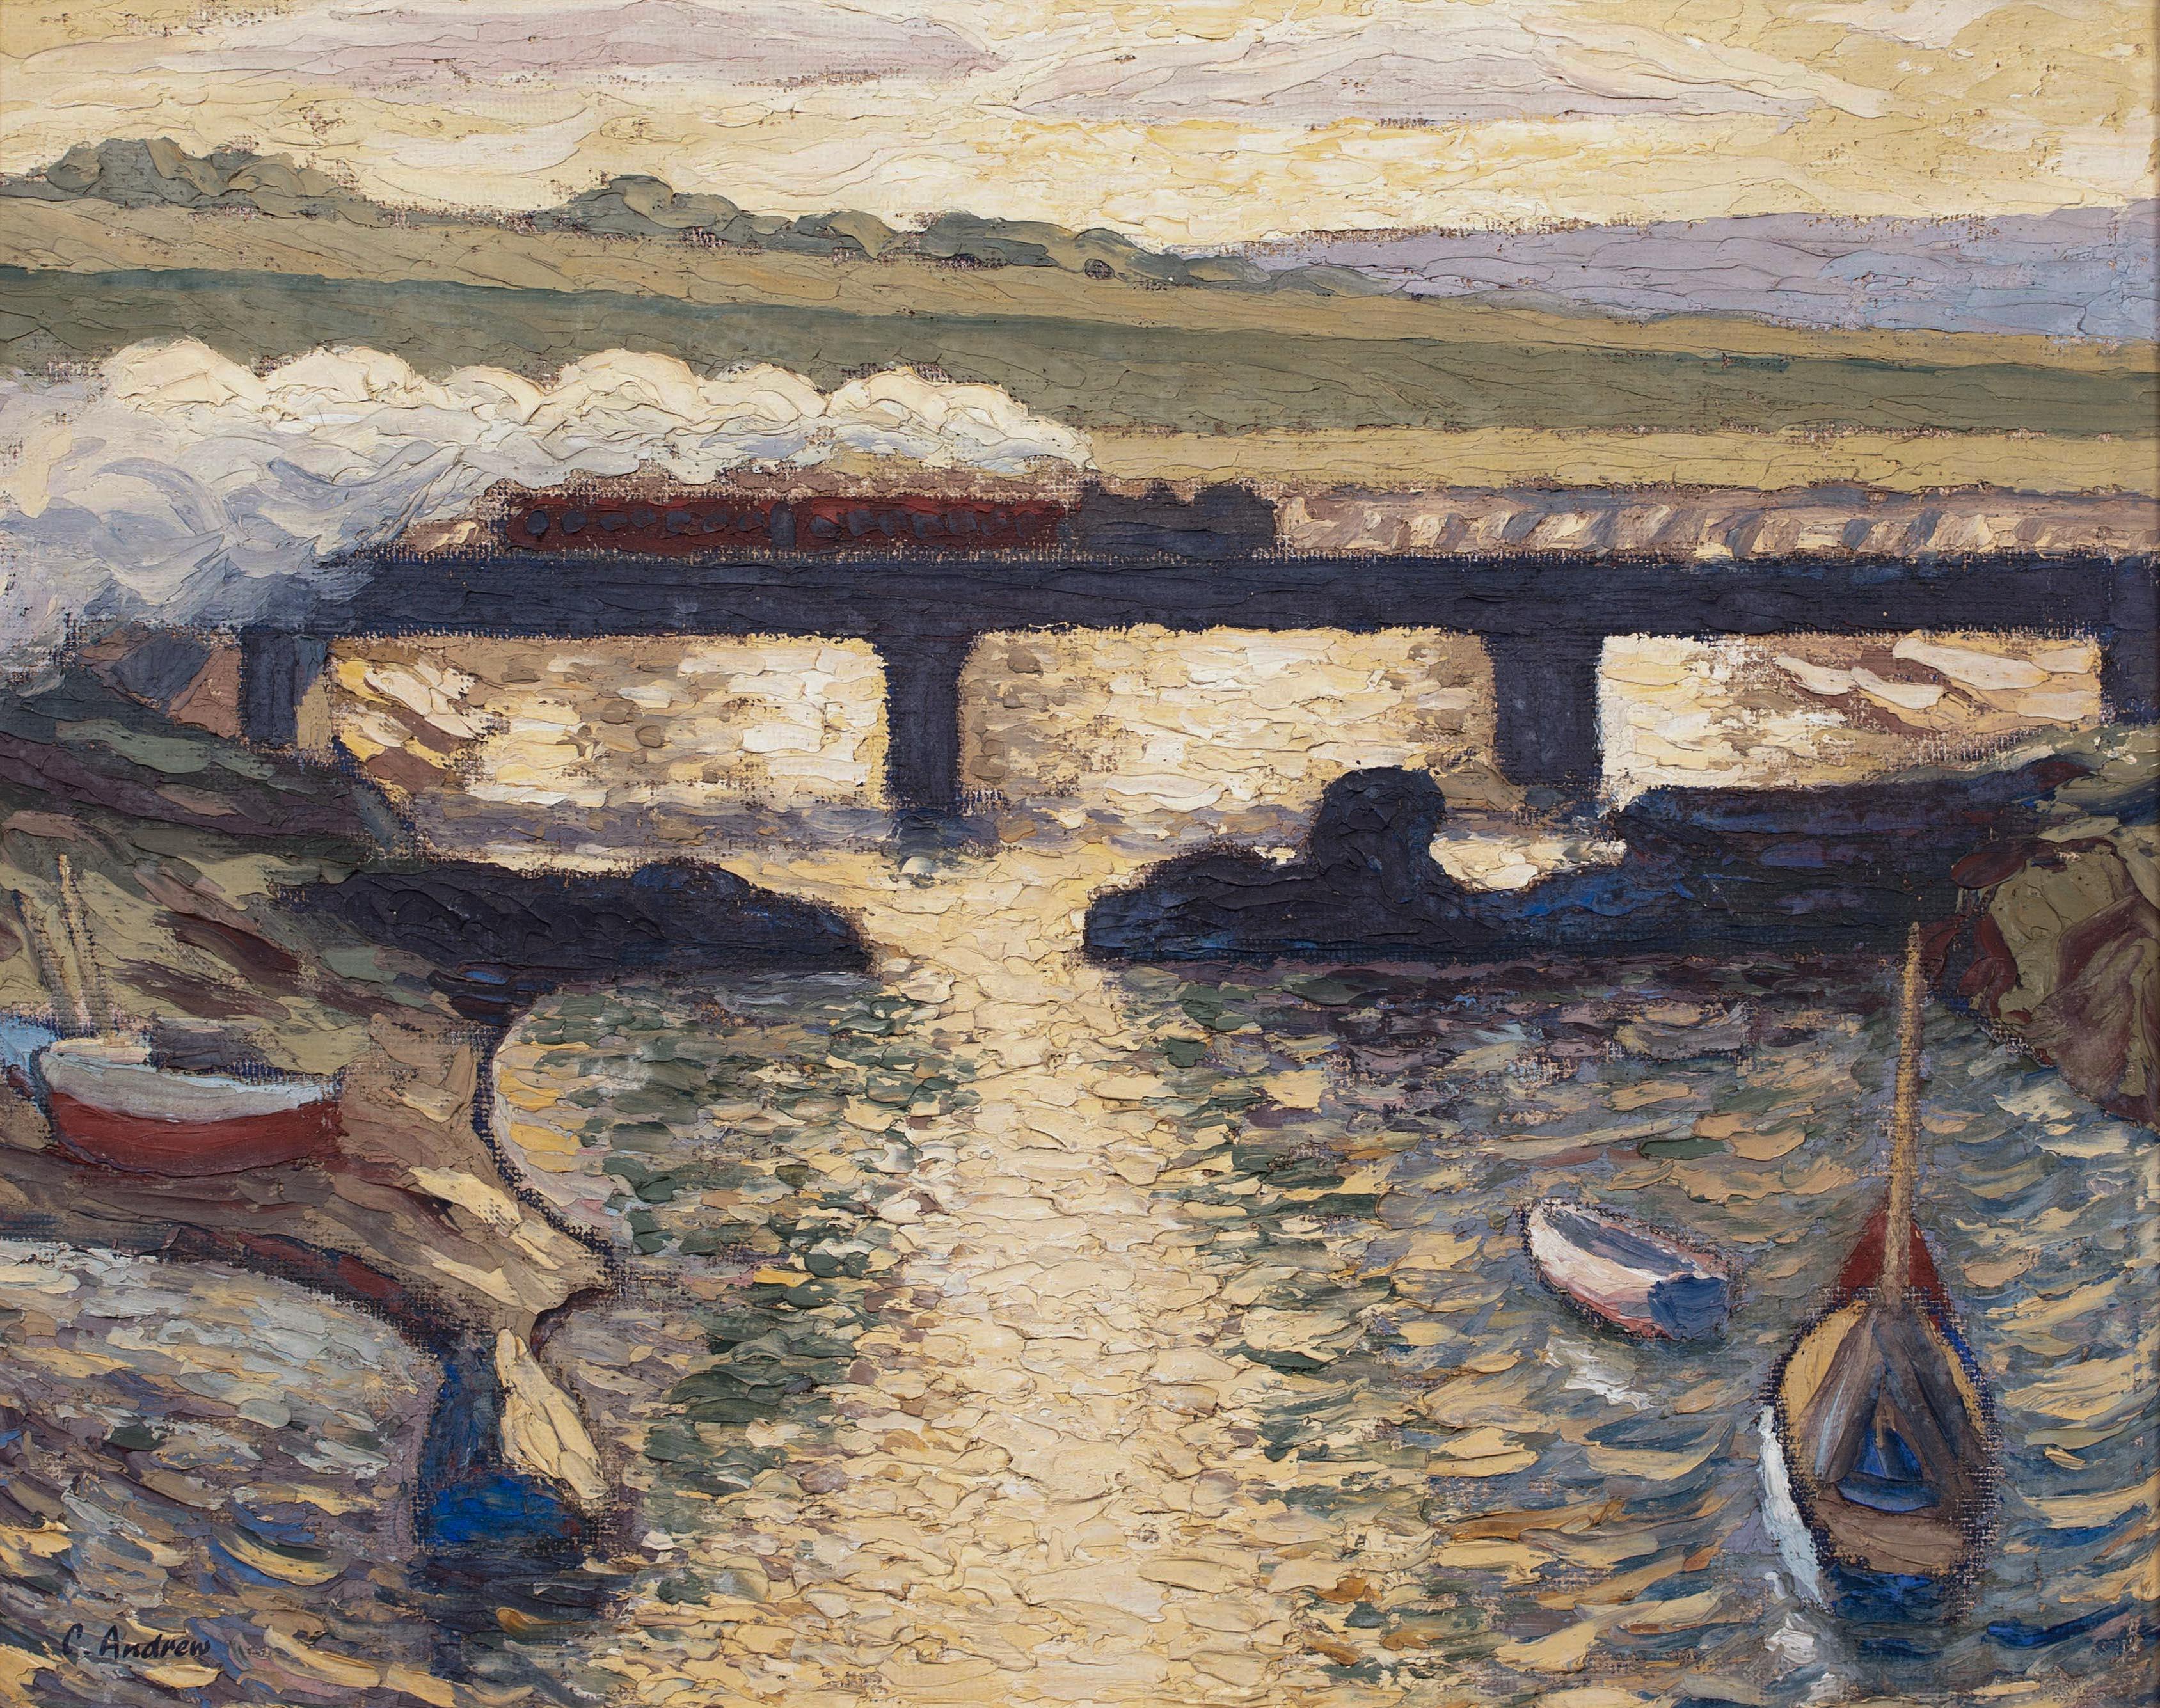 Train & Boats At Sunset, circa 1930  by Charles ANDREW RWA - Brown Landscape Painting by Unknown